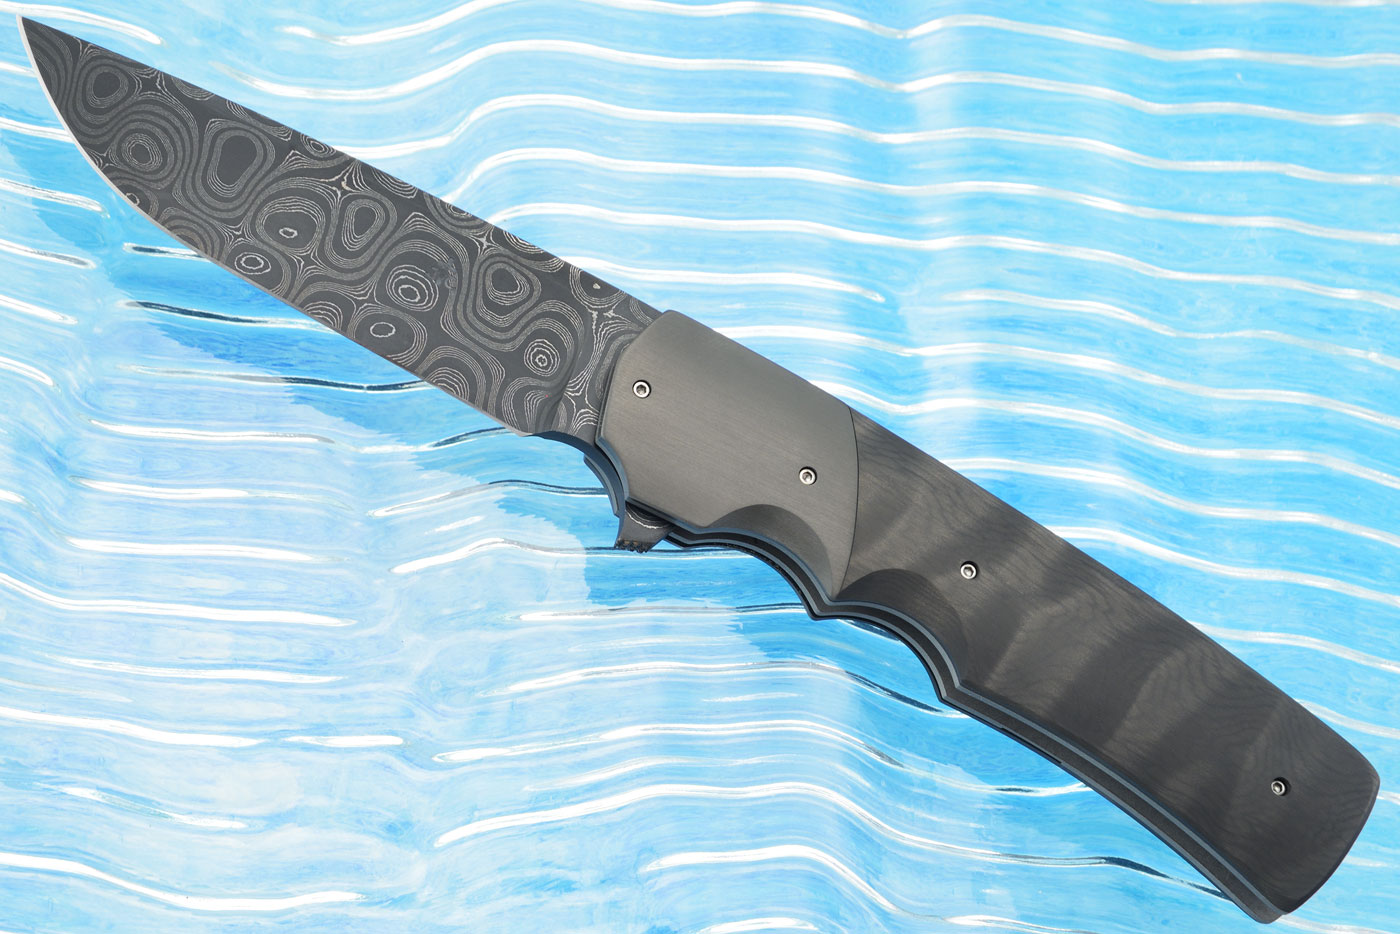 Large Hunter with Chatoyant Carbon Fiber and Zirconium (IKBS)